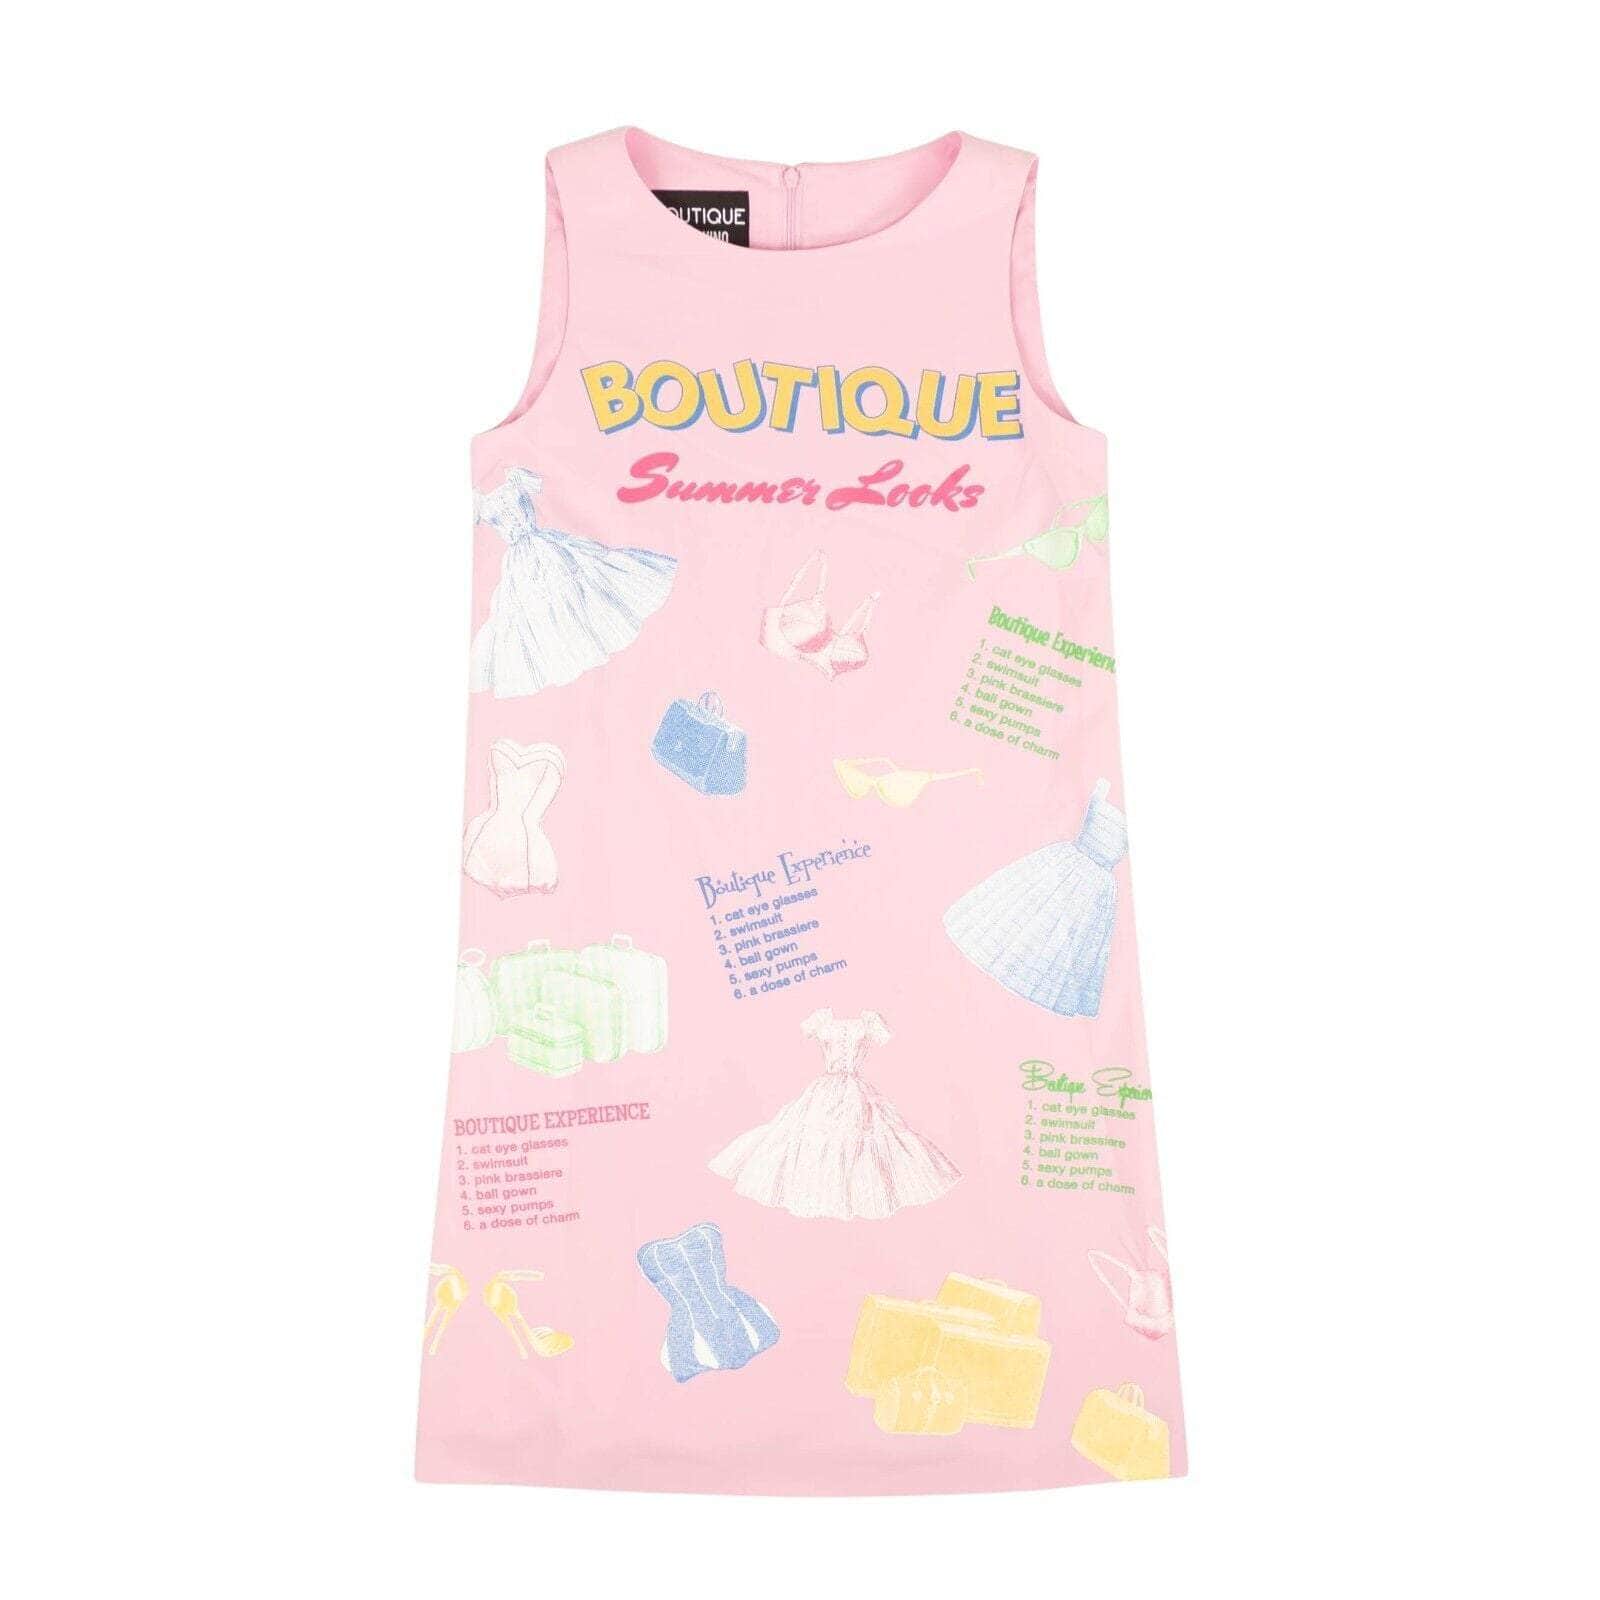 BOUTIQUE MOSCHINO boutique-moschino, channelenable-all, chicmi, couponcollection, gender-womens, main-clothing, size-36, size-38, size-40, size-42, size-44, under-250, womens-day-dresses Pink Moschino Summer Look Straight Dress